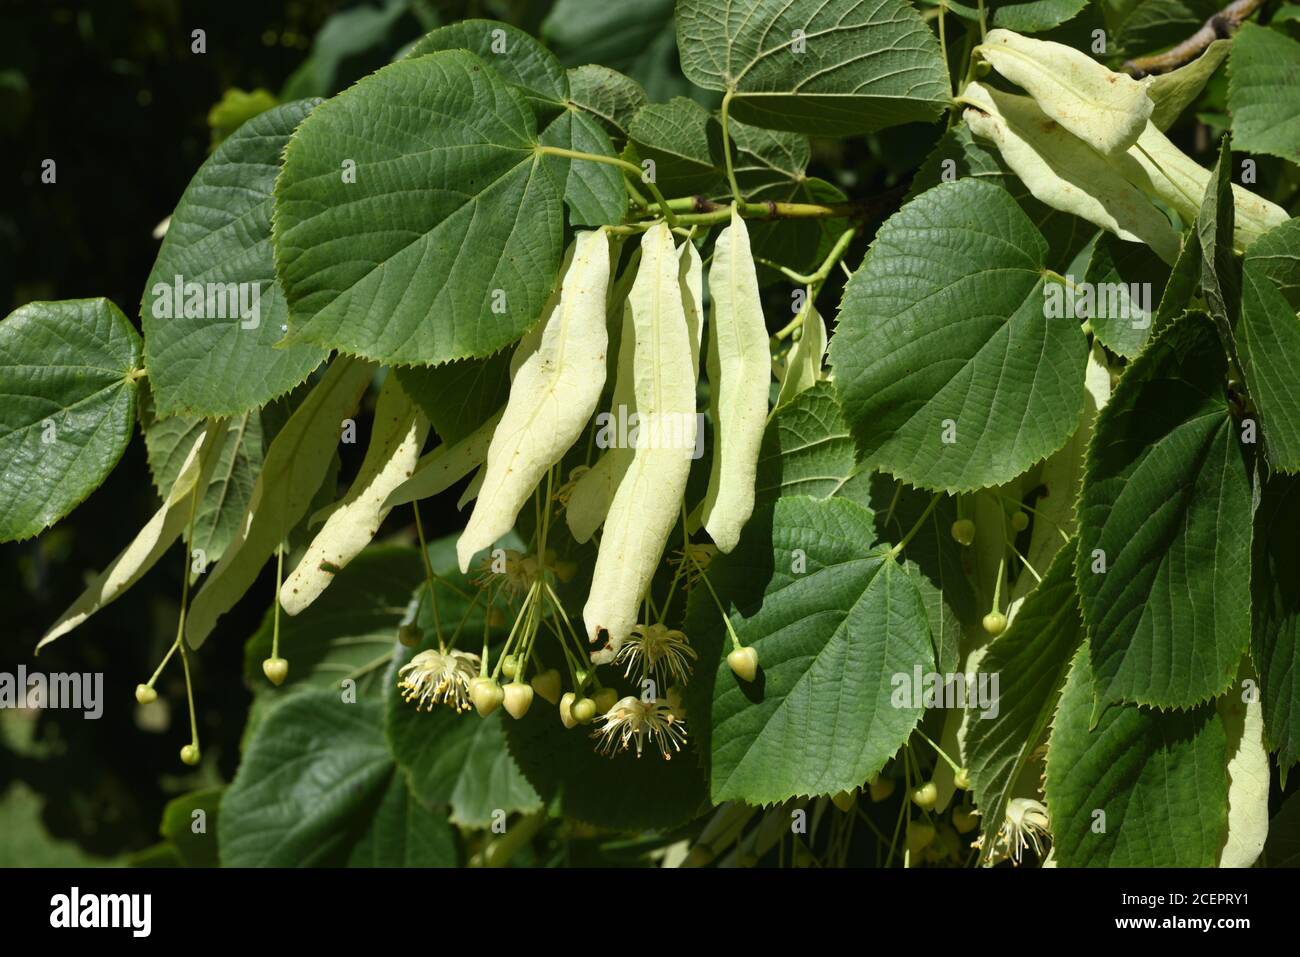 Flowers & Fruit of Large-leaved Linden Tree or Large-leaved Lime, Tilia platyphyllos Stock Photo